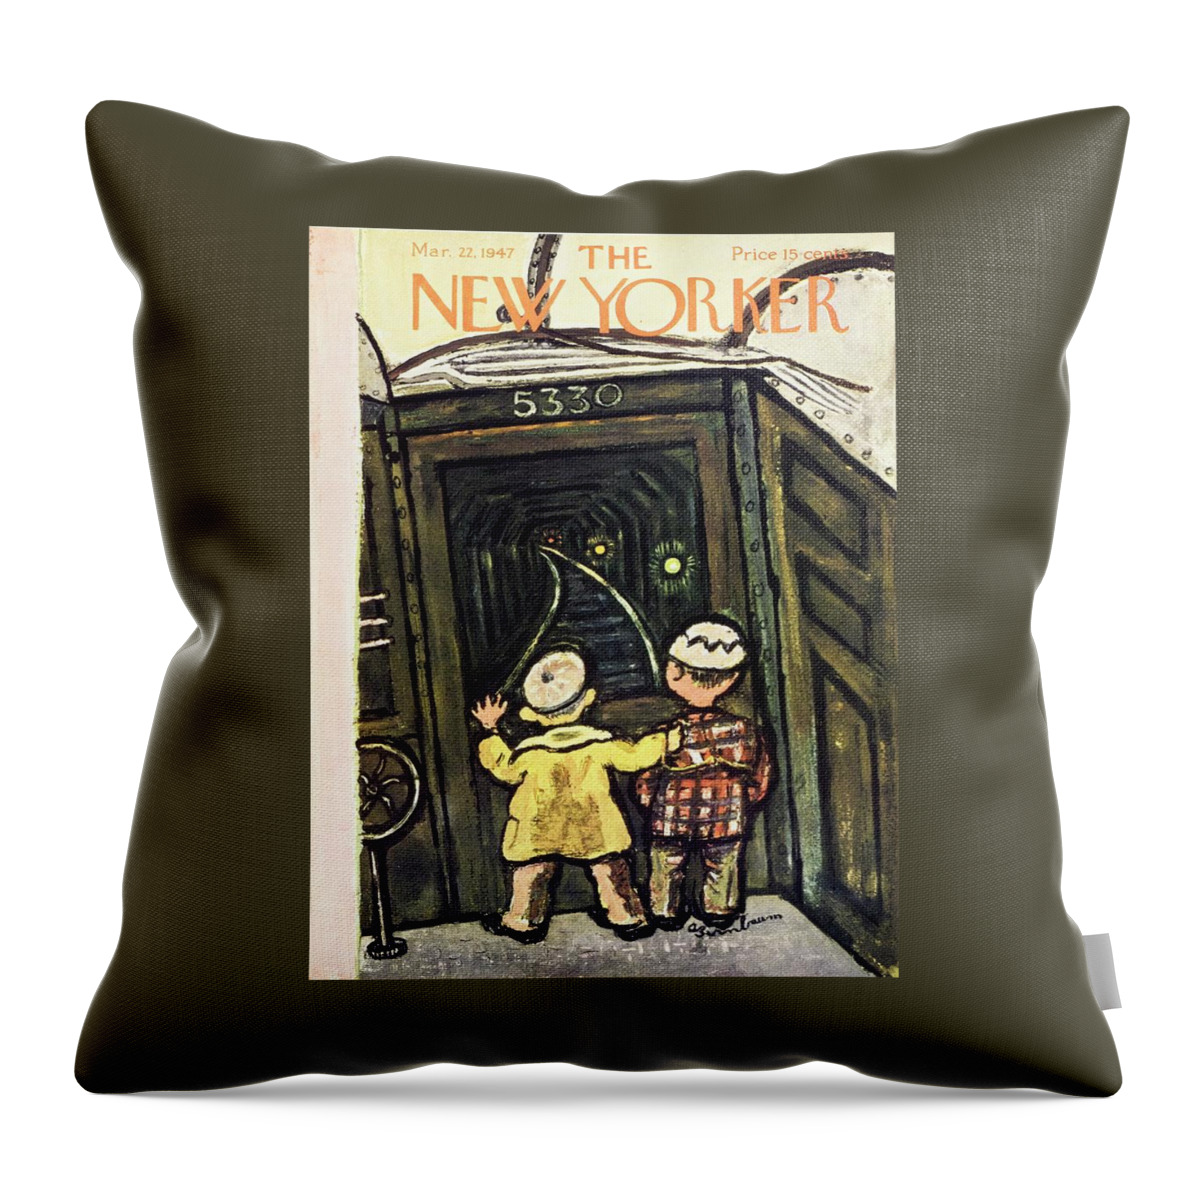 New Yorker March 22, 1947 Throw Pillow